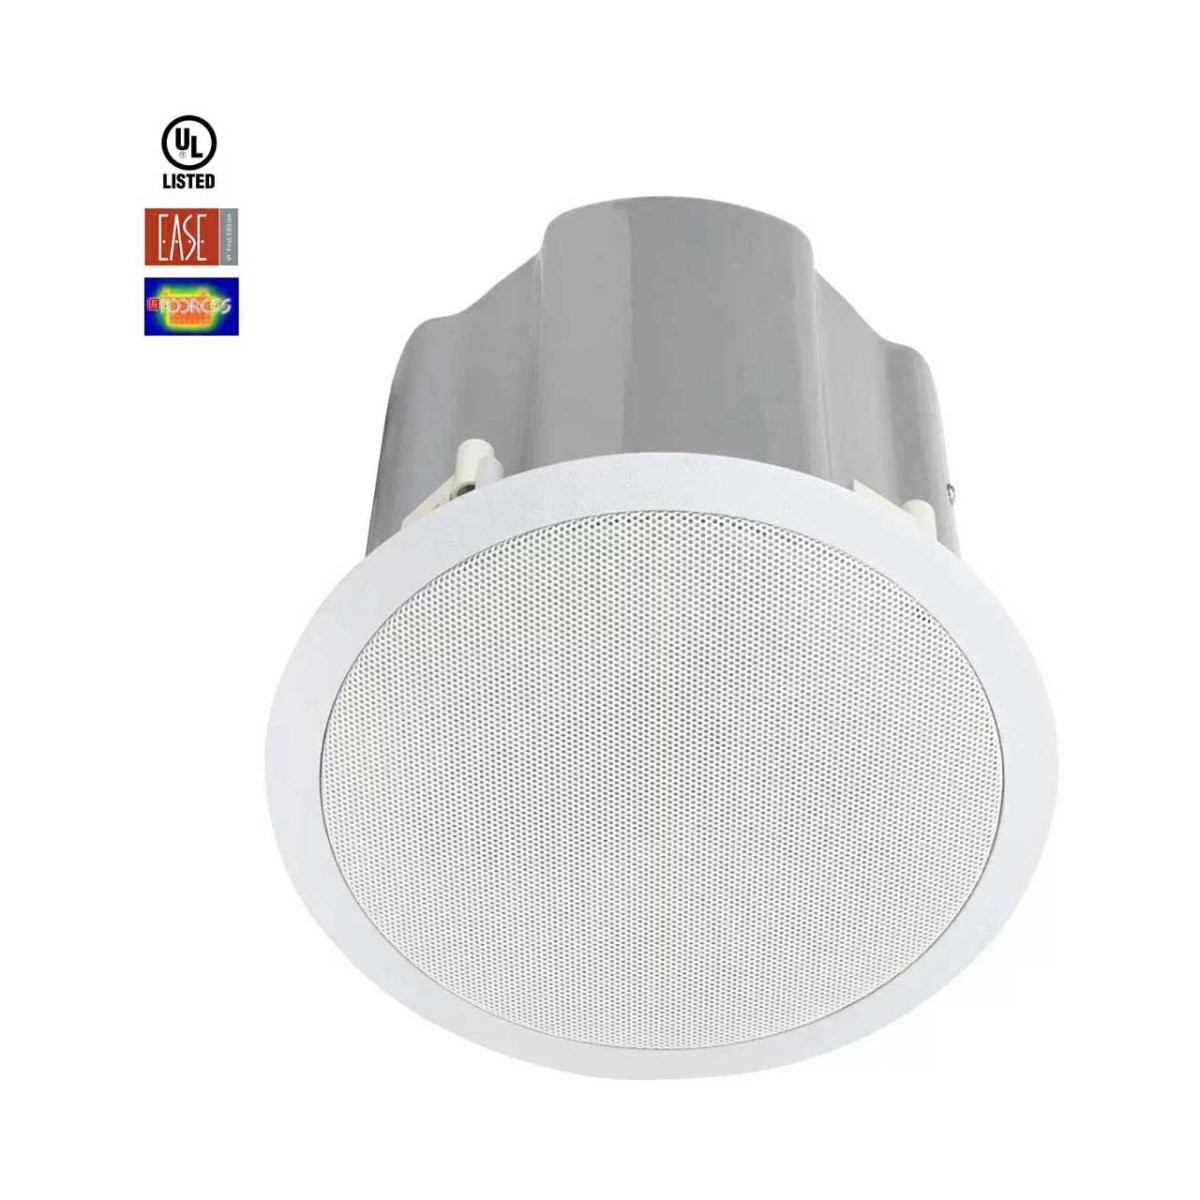 Picture of Lowell Manufacturing LMC-ES-52T 5.25 in. ES-52T Packaged Coaxial Ceiling Speaker with Grille Enclosure - Bridge